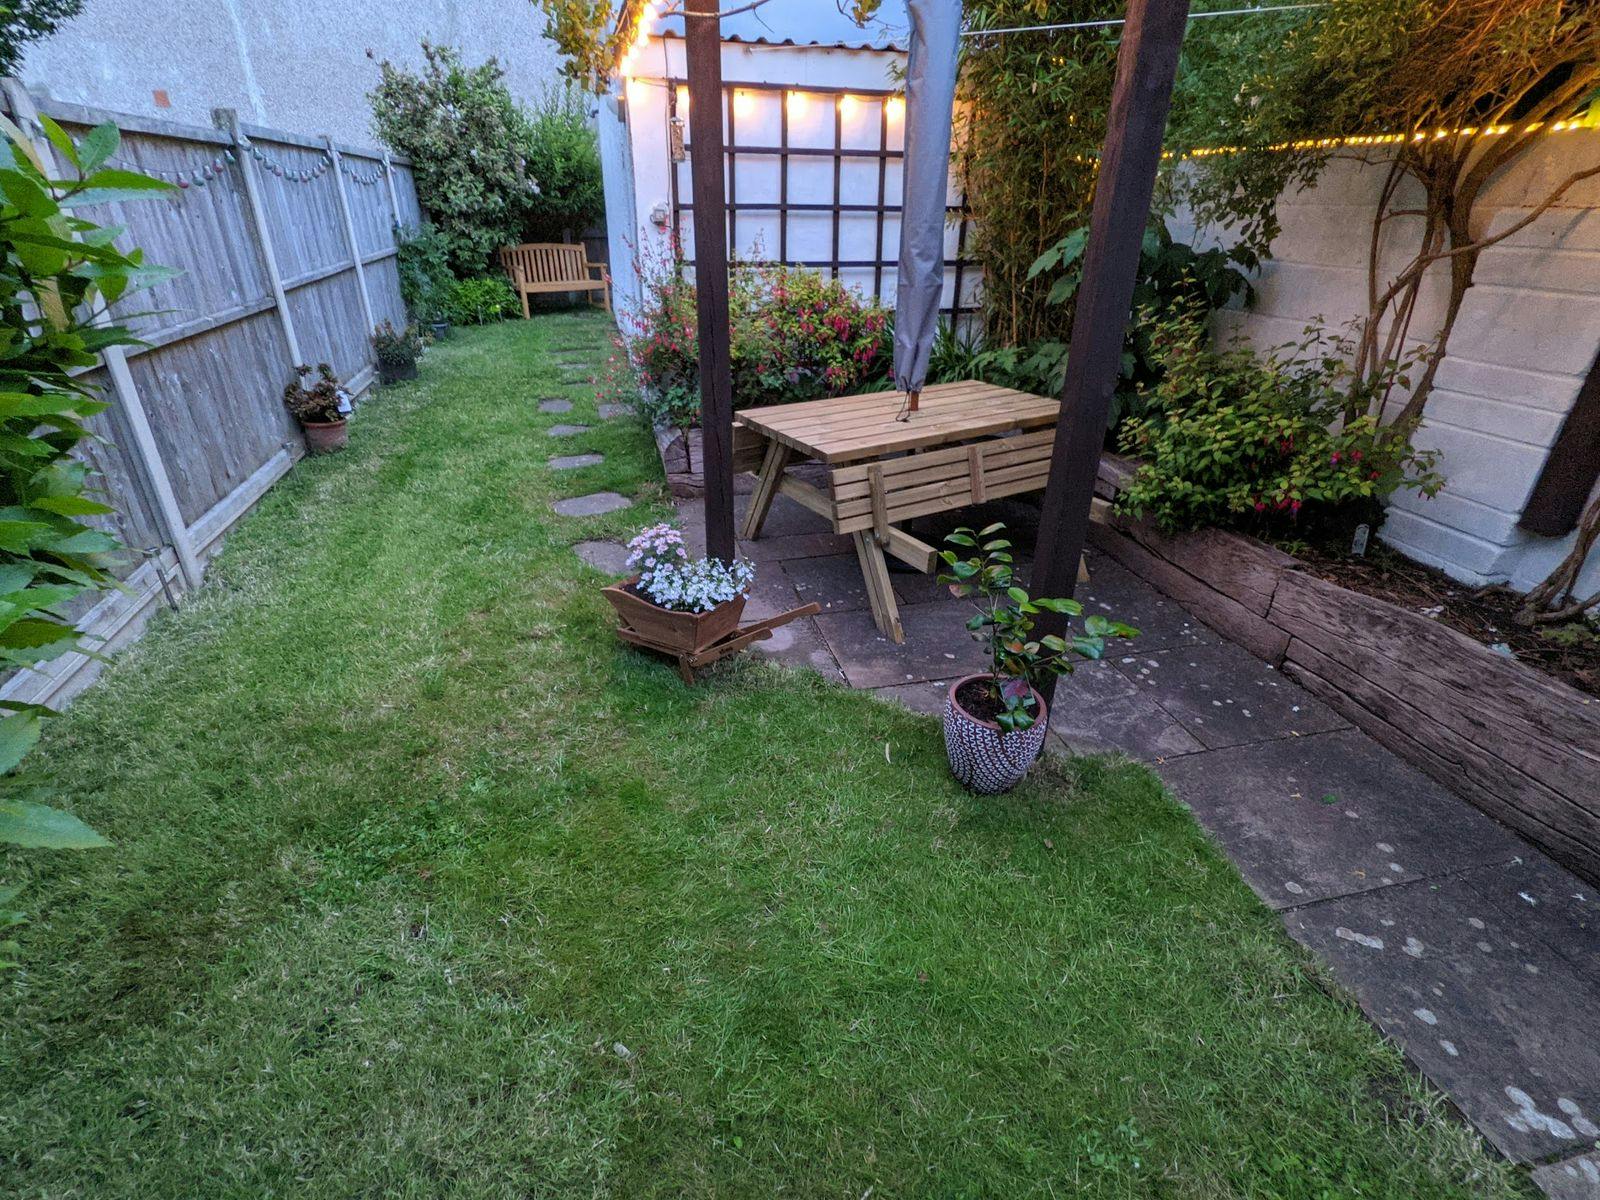 New garden benches and lights